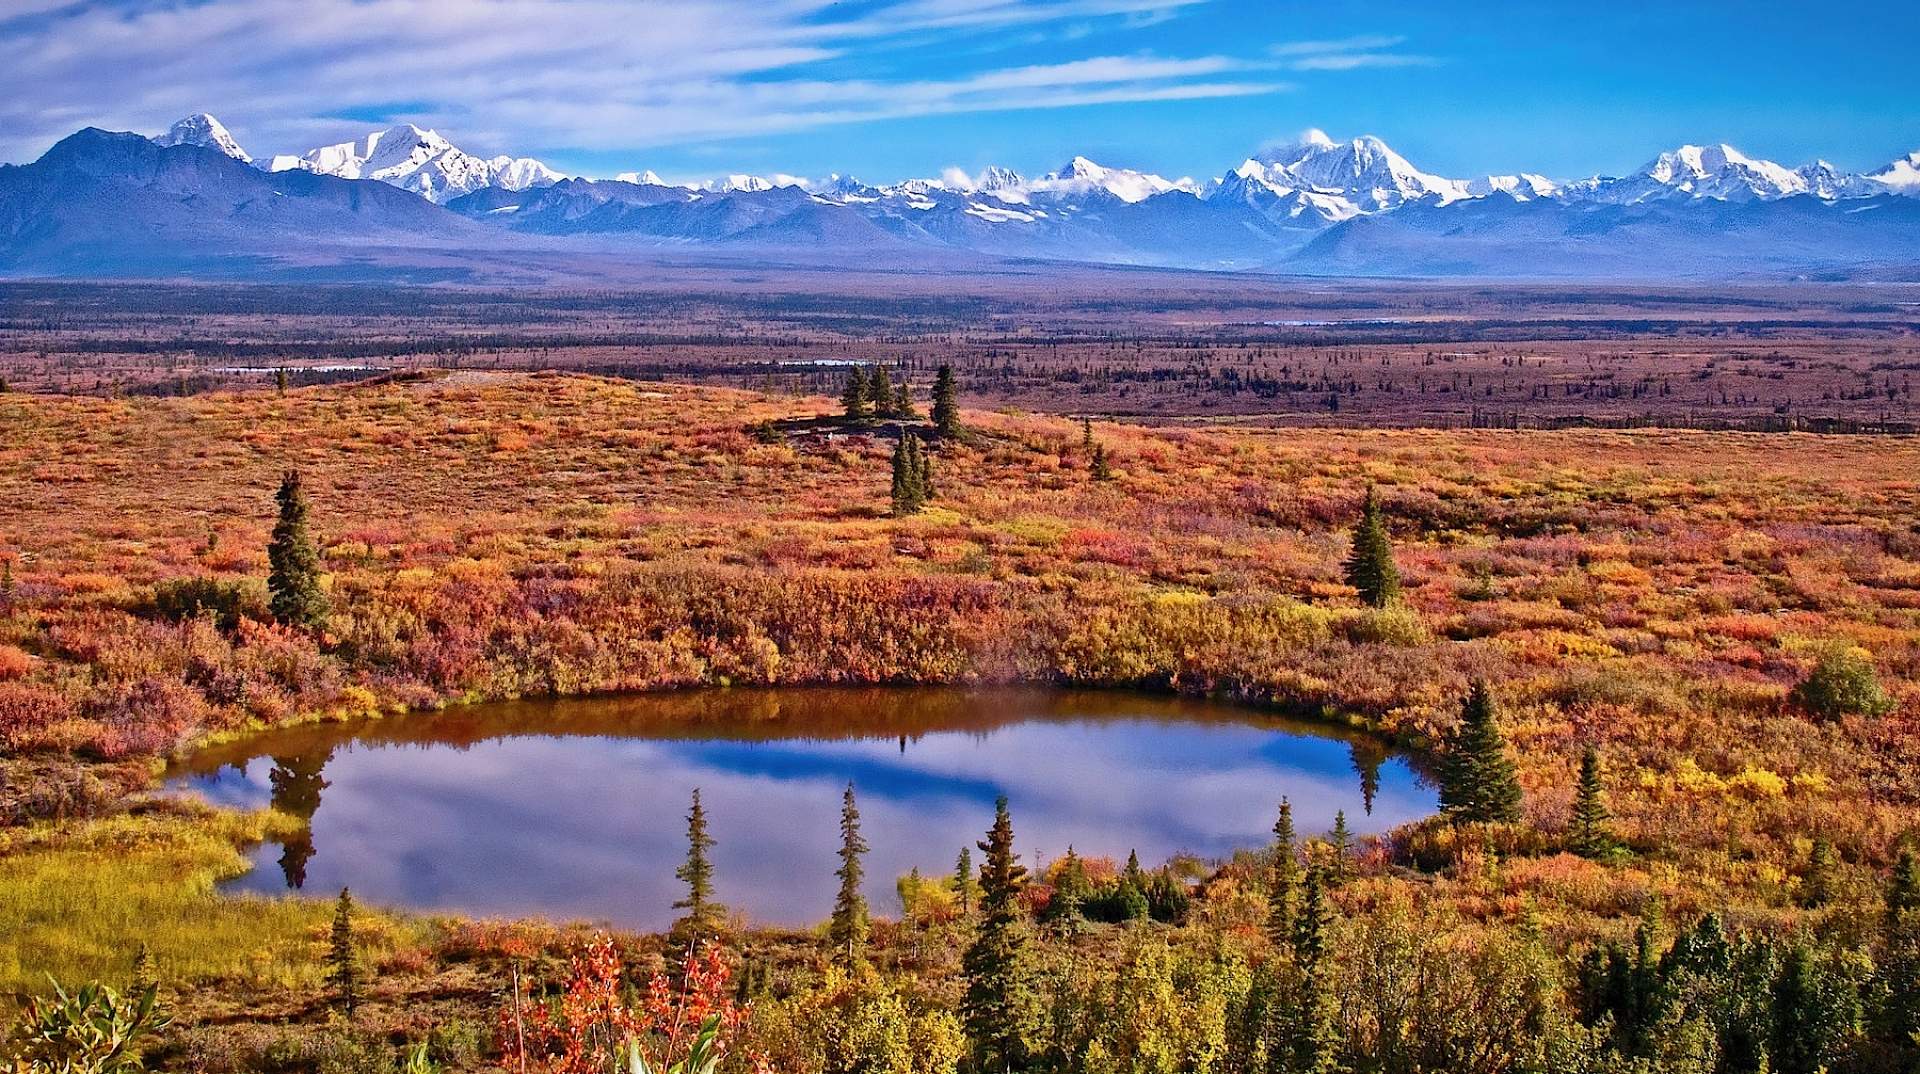 Alaska Range view - note the kettle pond in foreground - Mile 87 (approx.)